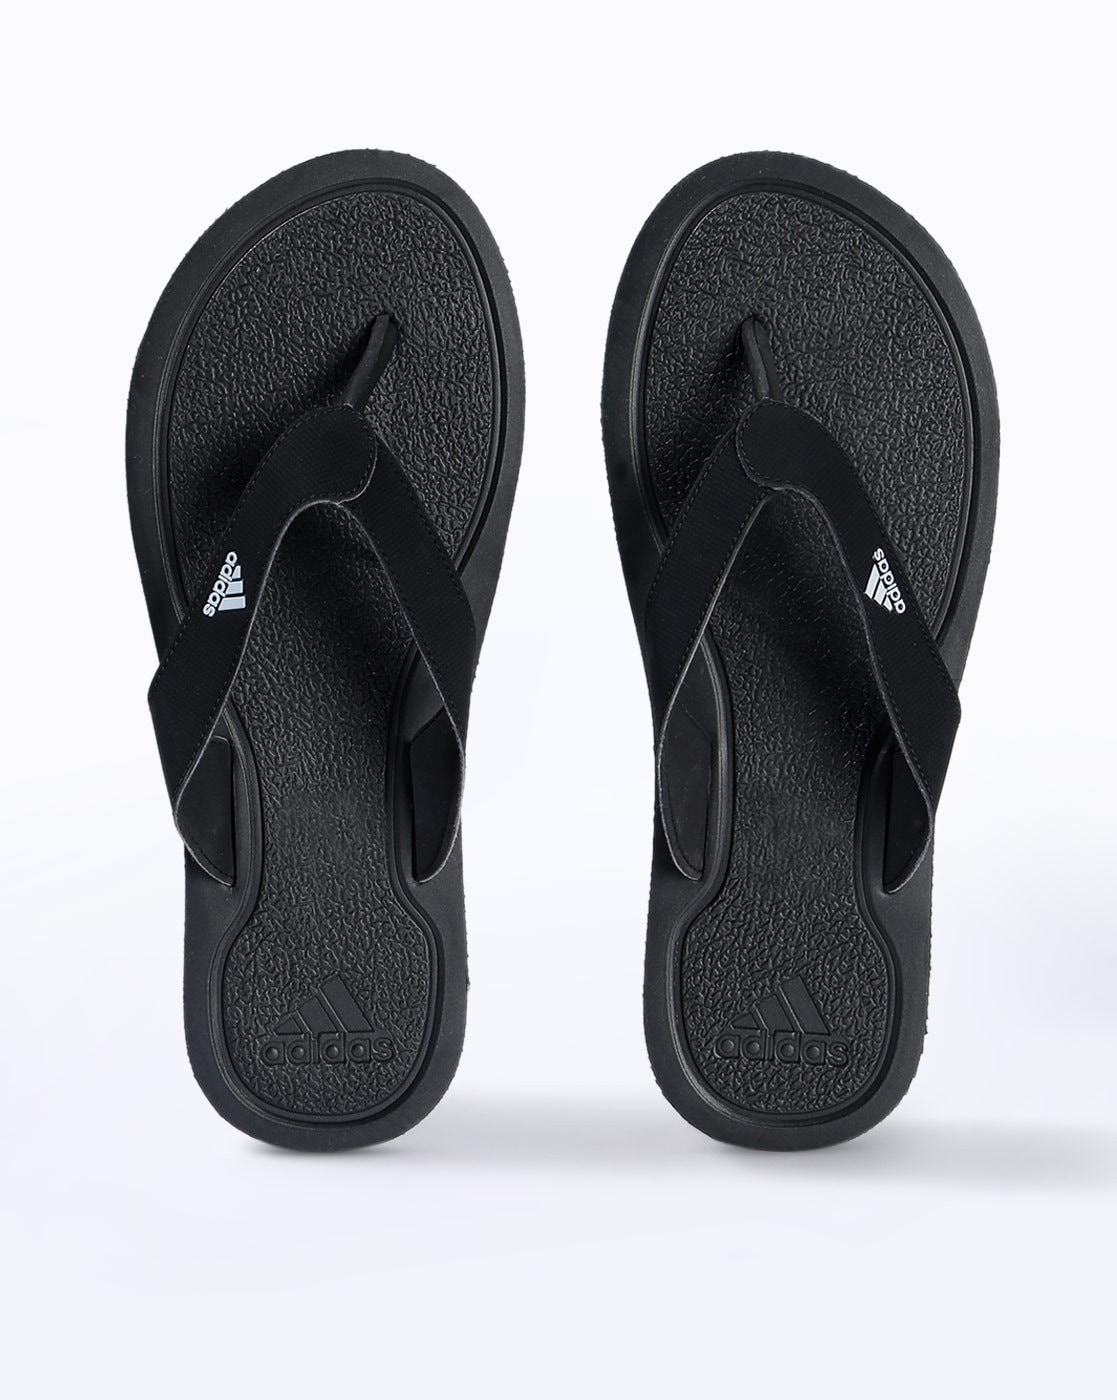 adidas stabile slippers cheap online